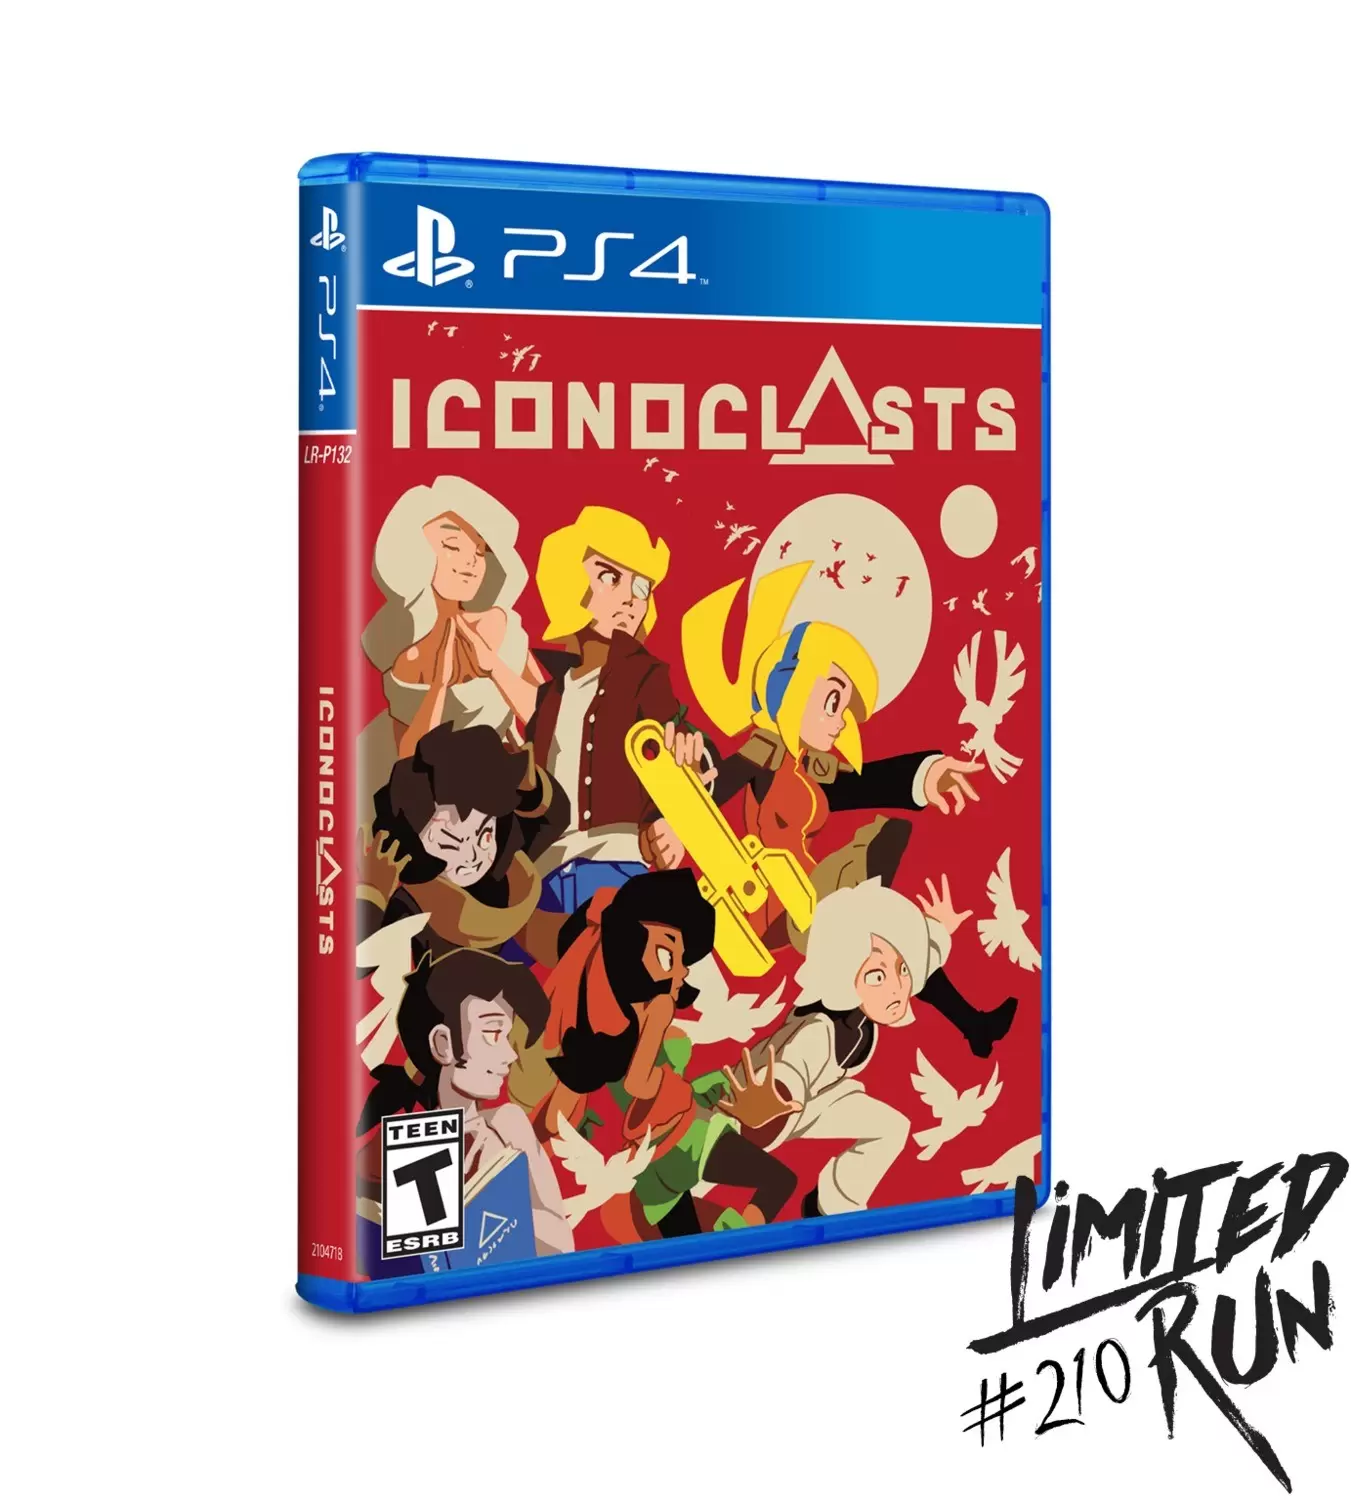 PS4 Games - Iconoclasts